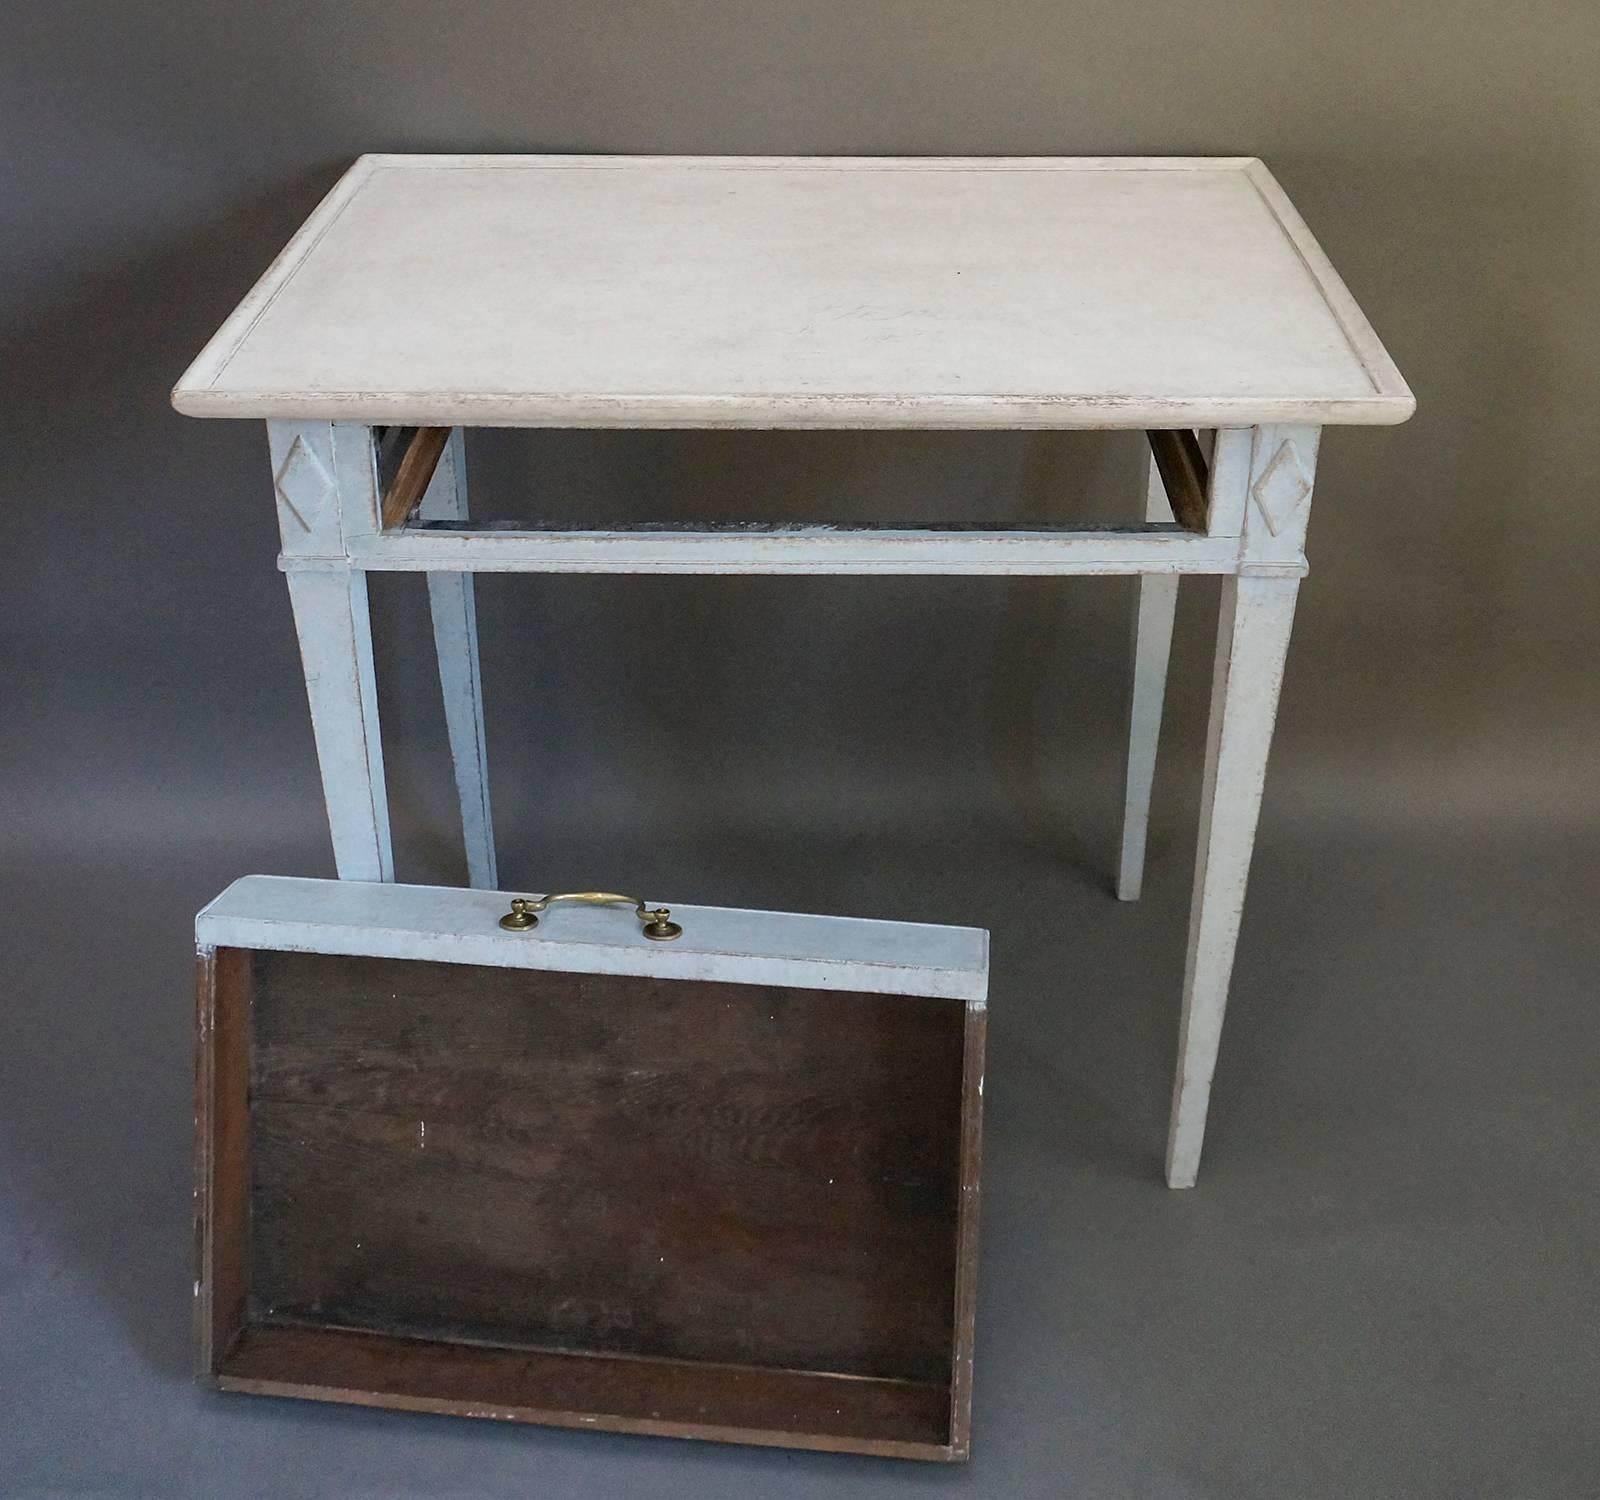 Small side table from the late Gustavian period, Sweden circa 1820. Tapering square legs with raised lozenges on the corner blocks. Single apron drawer with original brass pull.